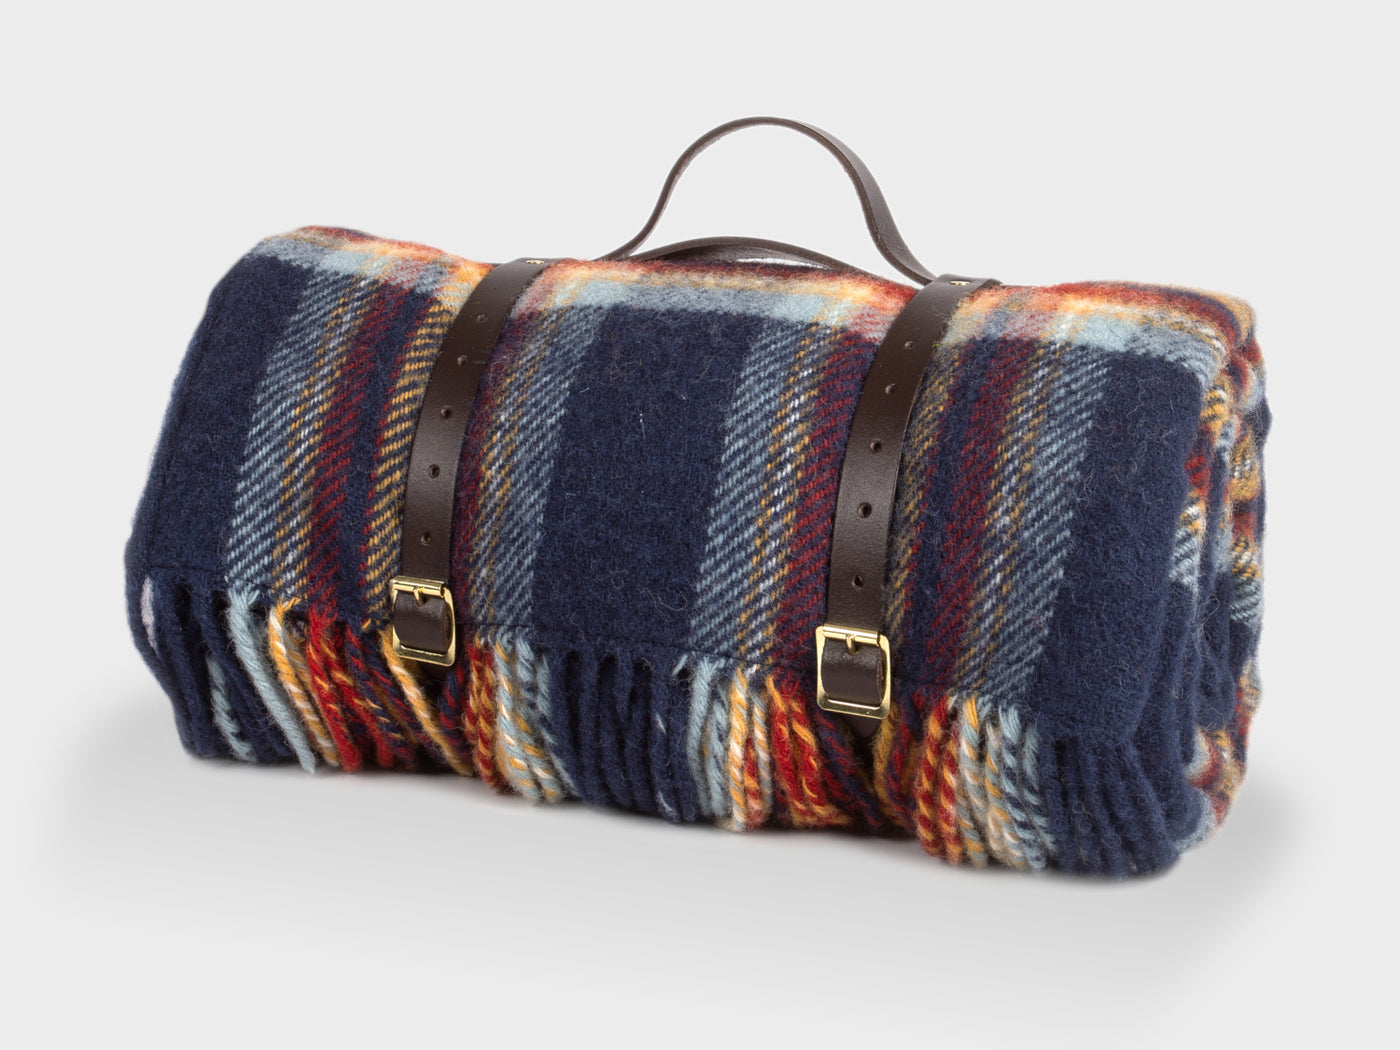 Multi-coloured picnic rug by The British Blanket Company rolled up with leather straps.